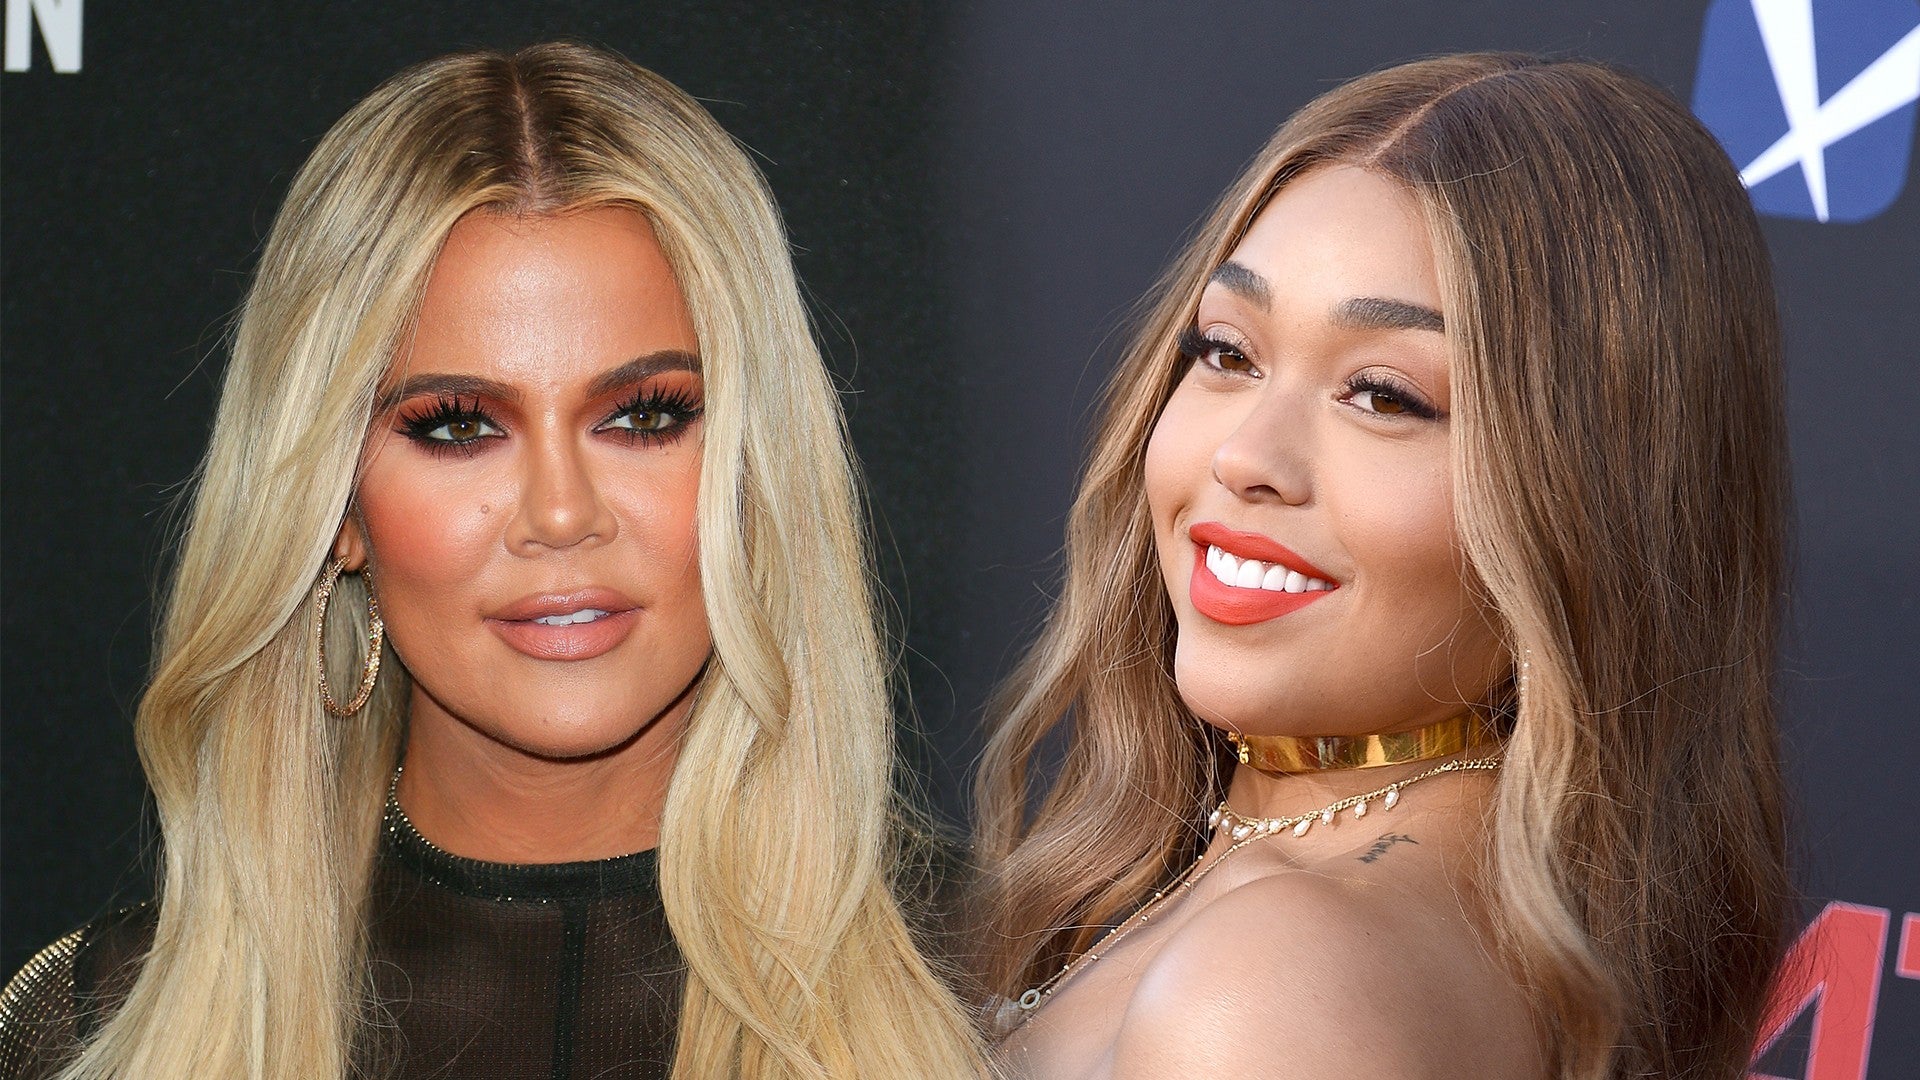 smileyval05 on X: Jordyn Woods is living her BEST life with a man who  loves and adores her ❤️ Meanwhile Khloe Kardashian *who tried to destroy  Jordyn* outchea taking her 234,567,890 “L”